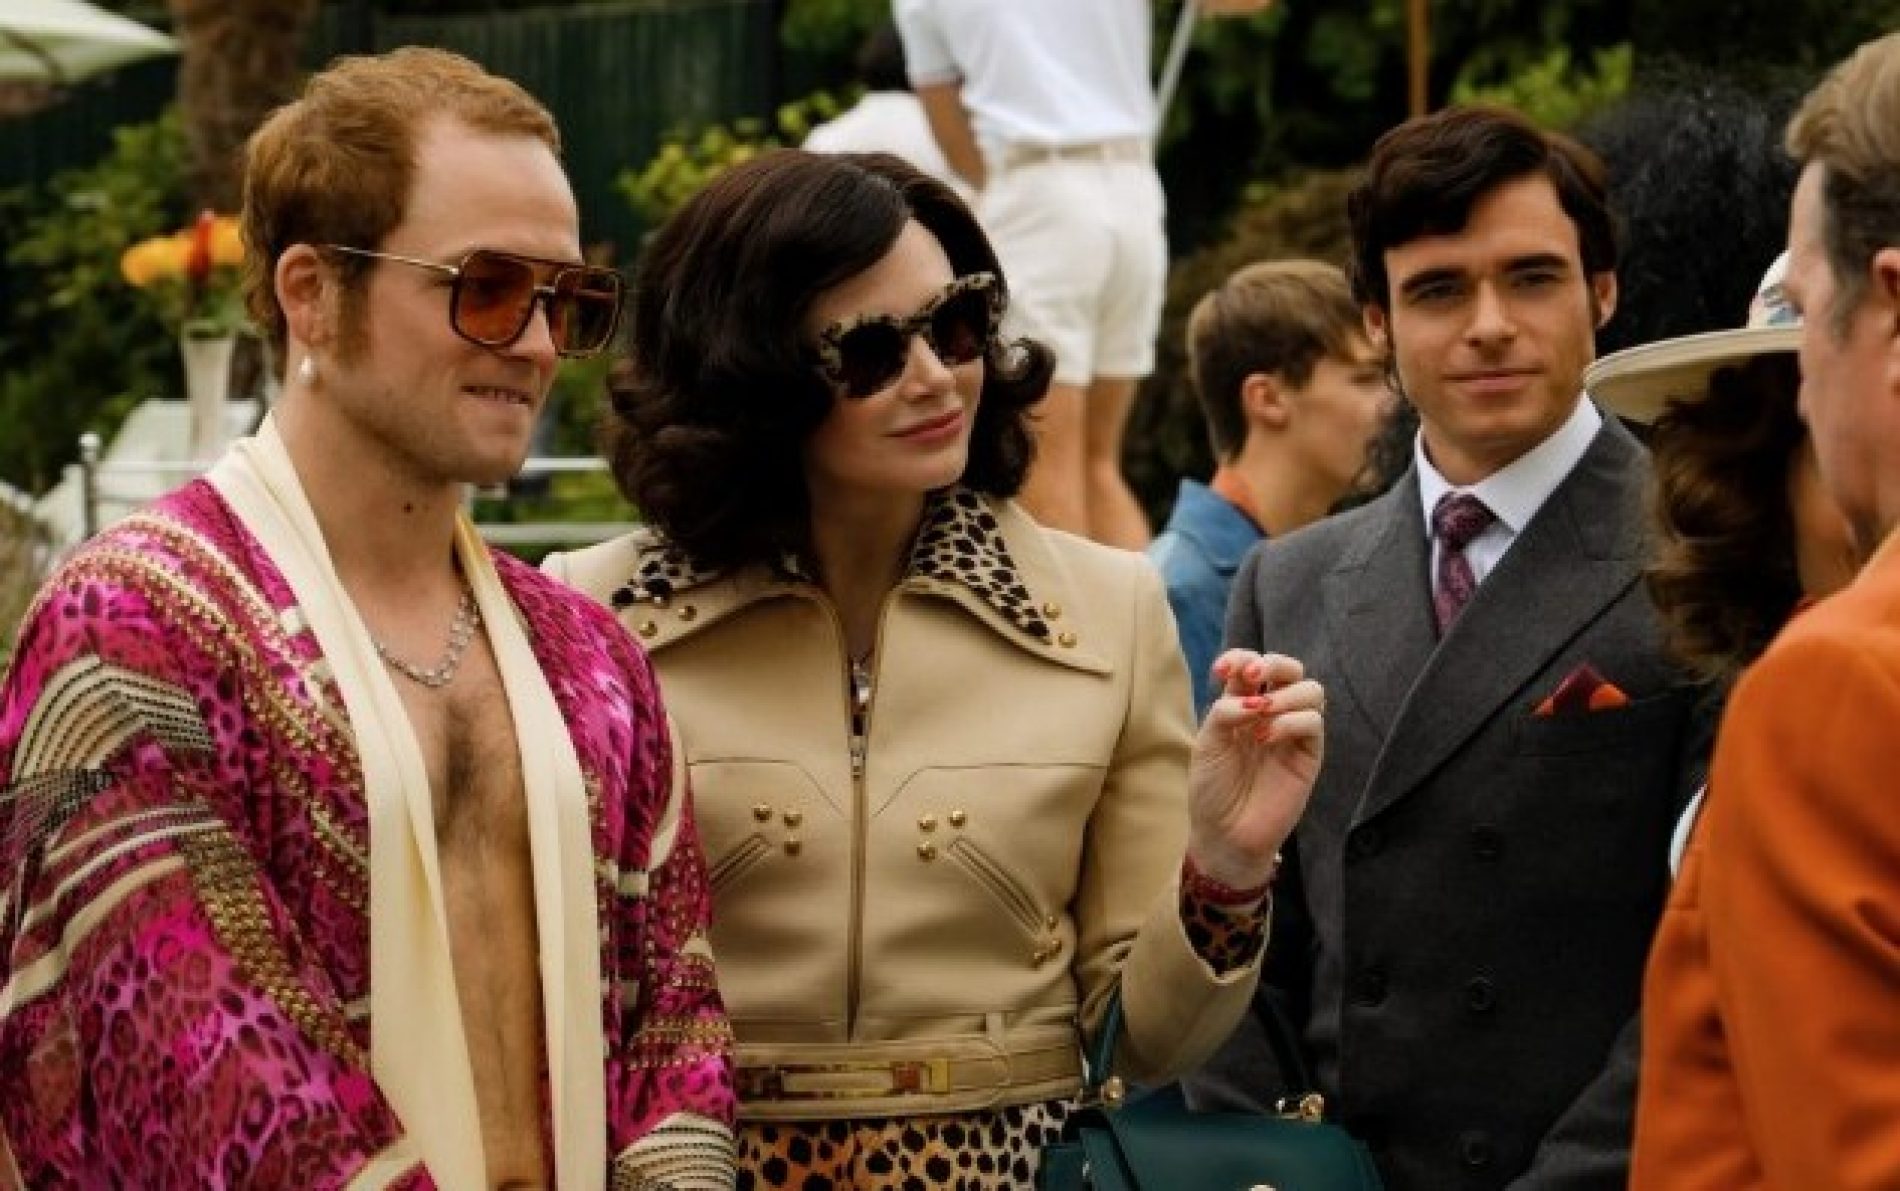 Rocketman reportedly makes history as first studio film with explicit gay sex scenes